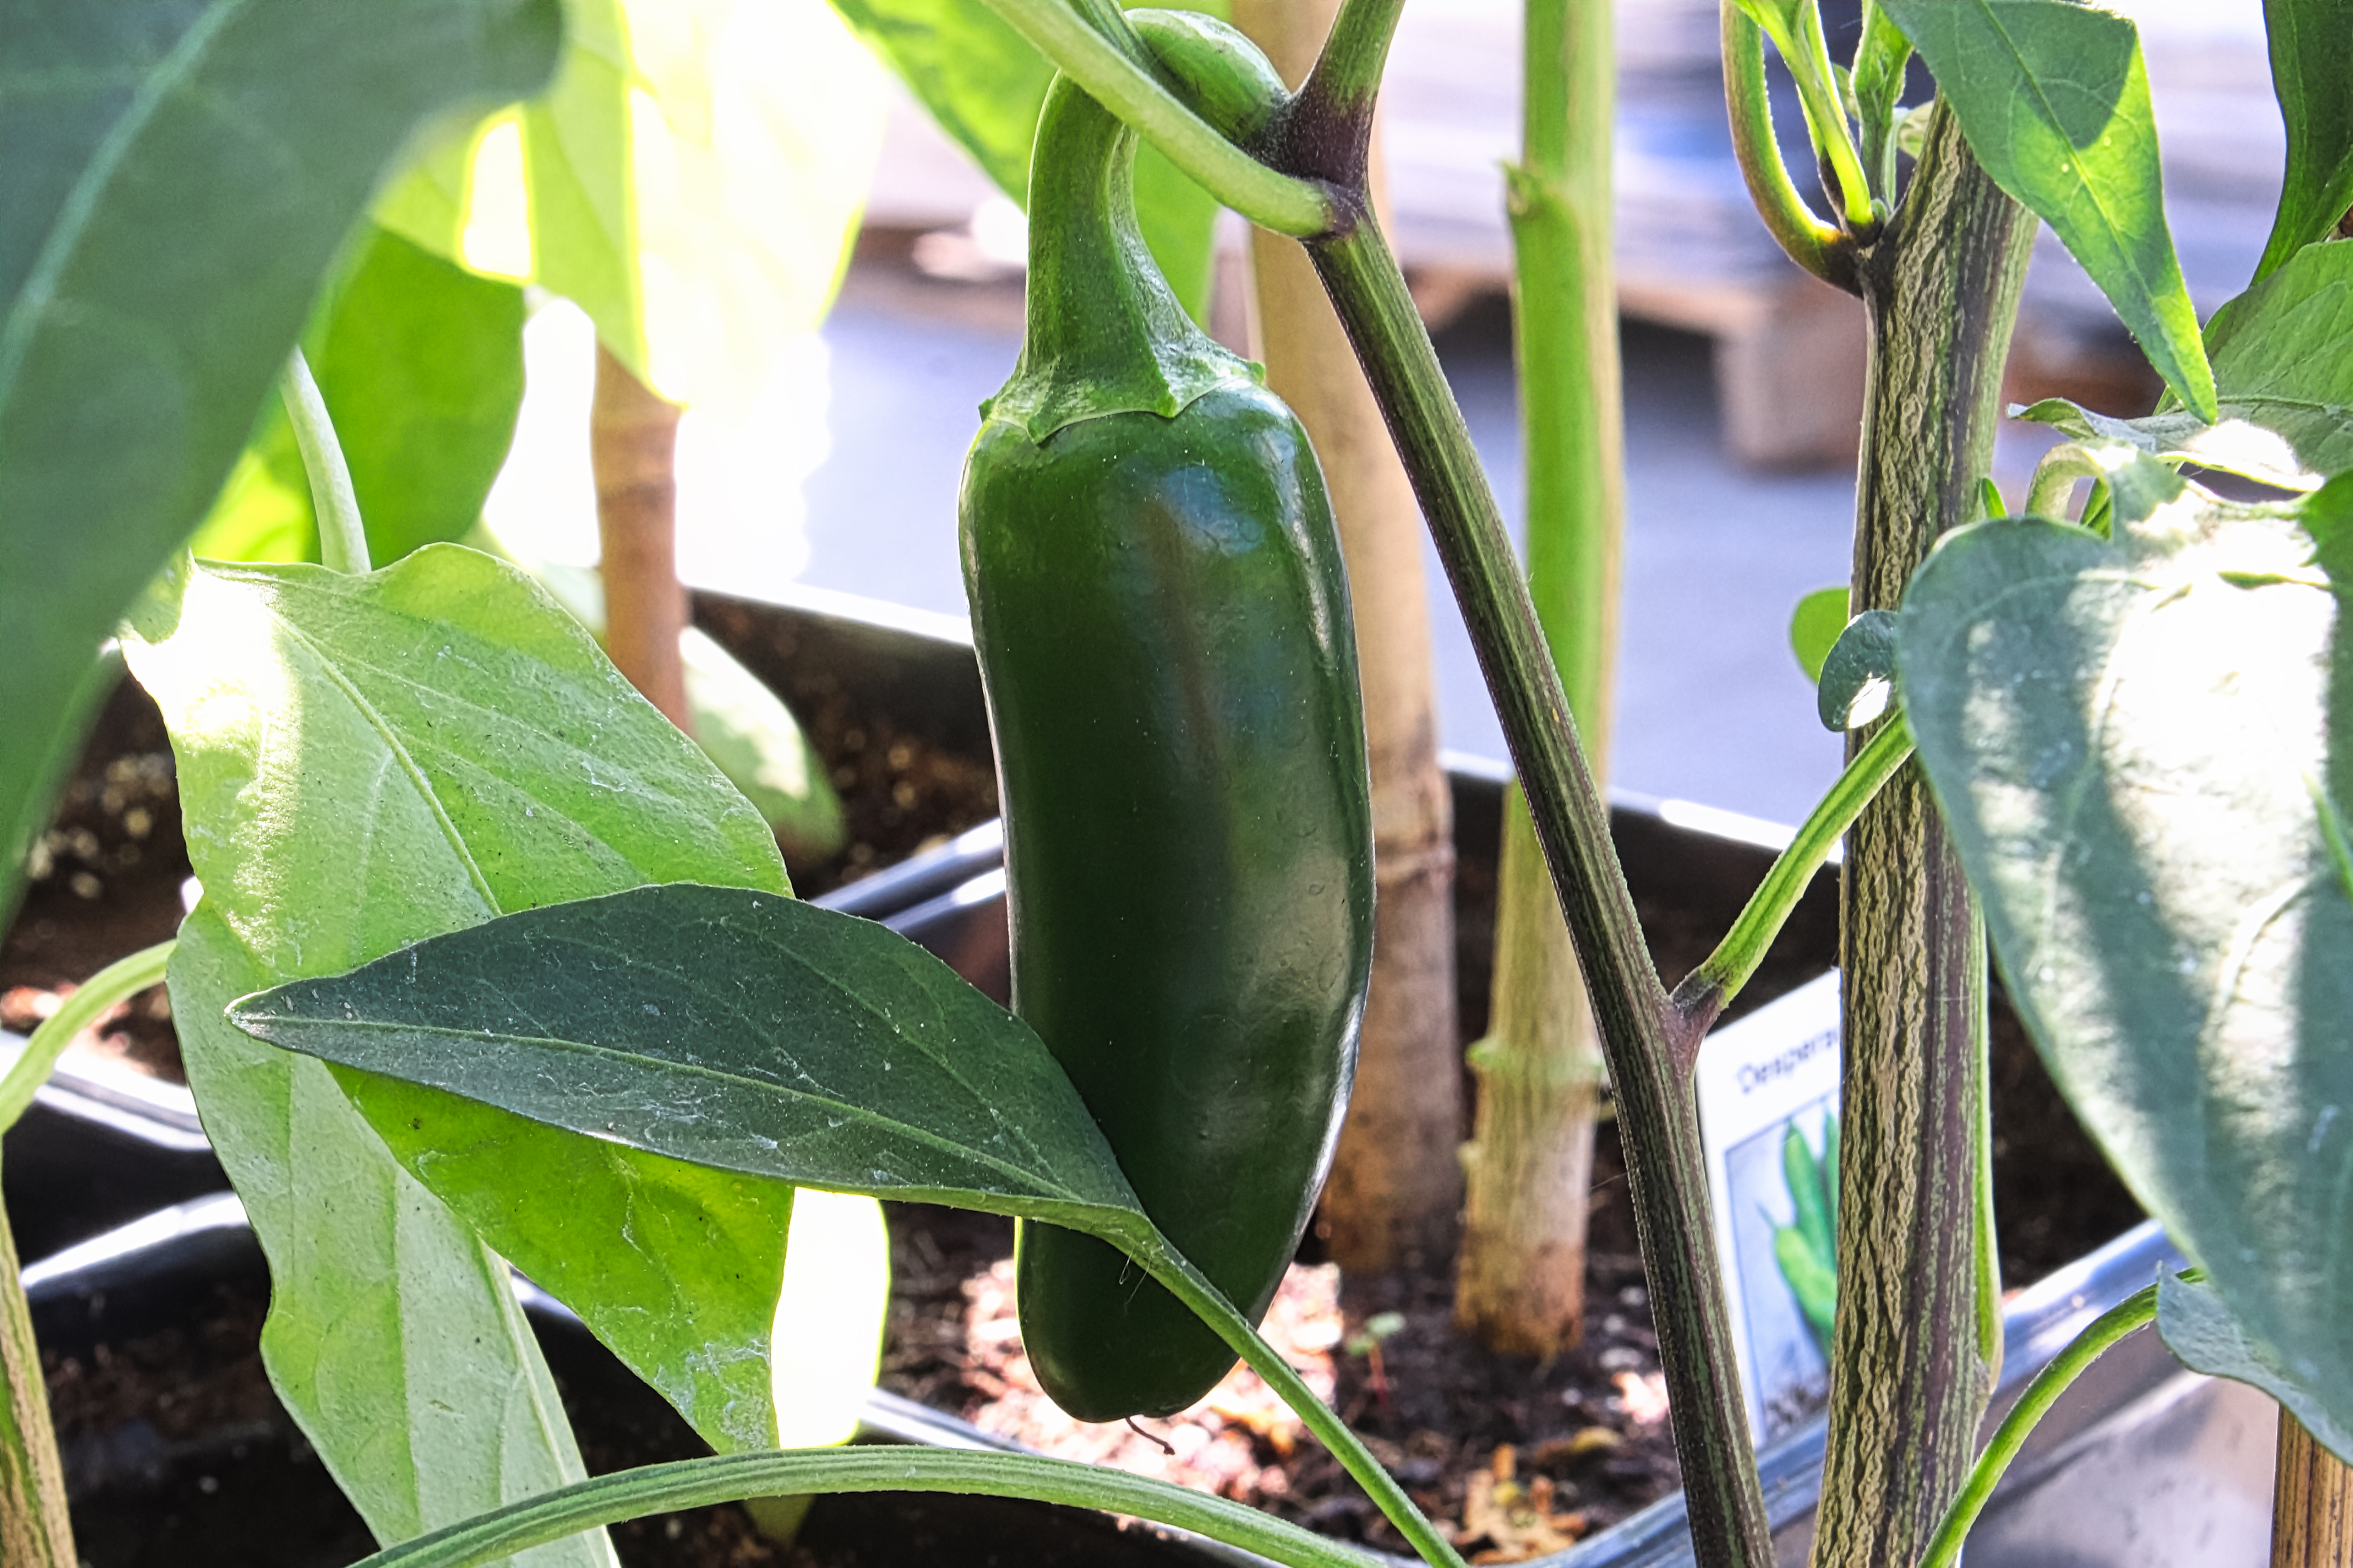 A green jalapeno pepper growing on a vine